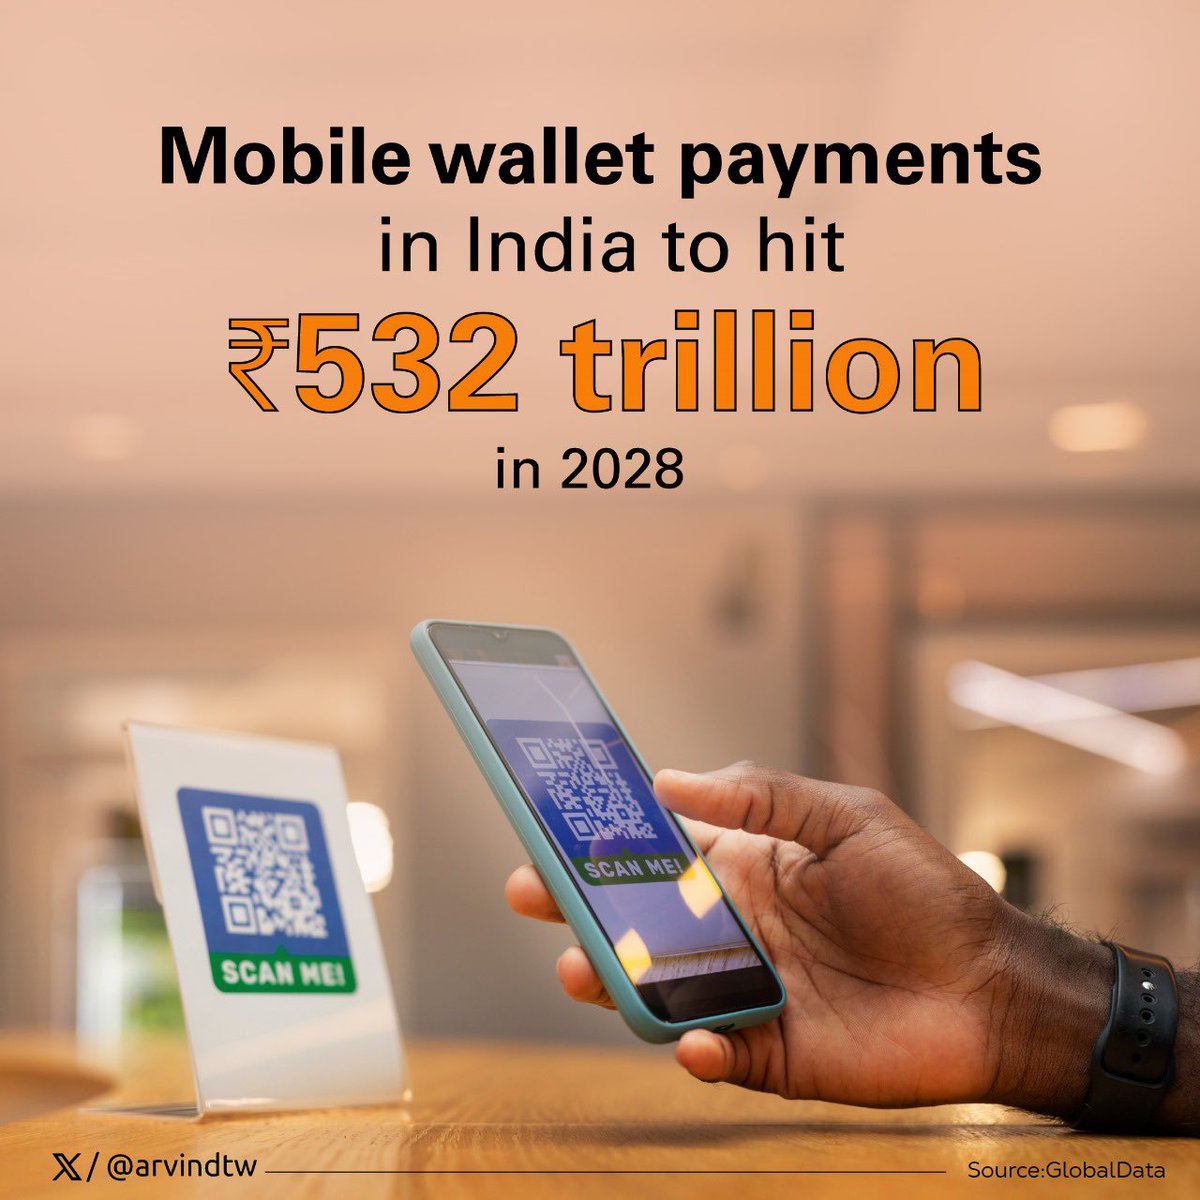 The rise in mobile wallet payment in 🇮🇳 underscores nation's rapidly evolving digital landscape, driven by burgeoning population embracing cashless transactions. Increased smartphone penetration & government's push for digitalization, are fueling this exponential growth.